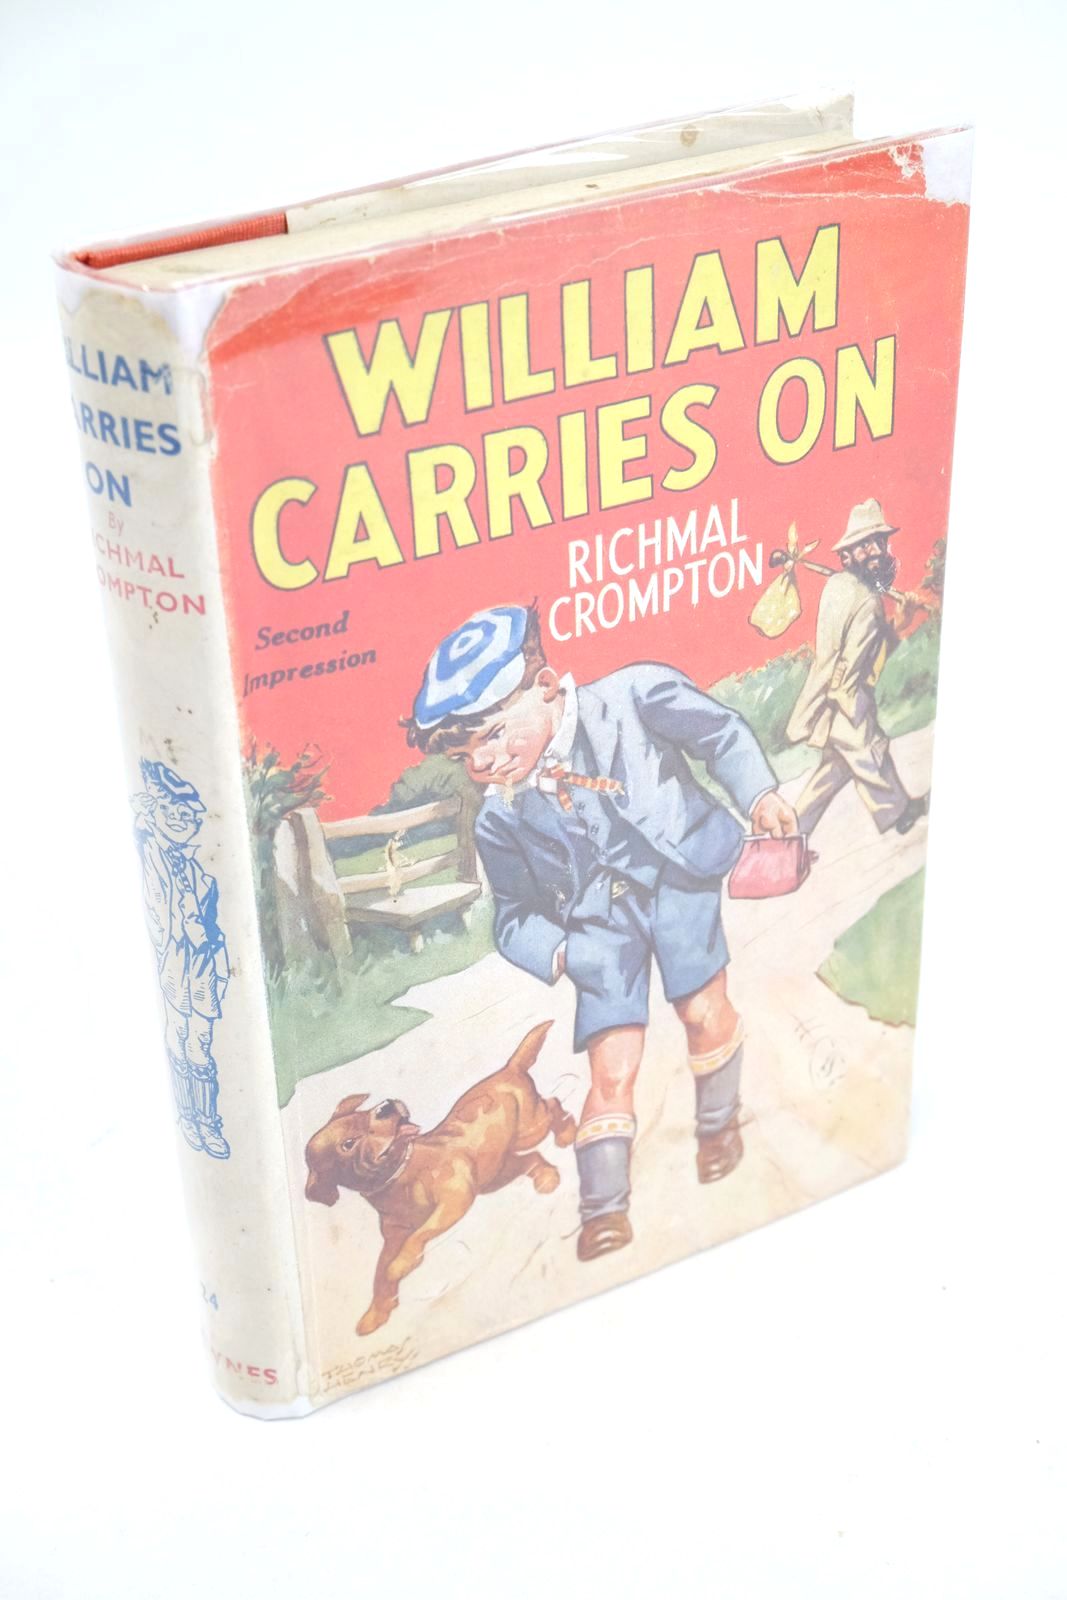 Photo of WILLIAM CARRIES ON- Stock Number: 1325582